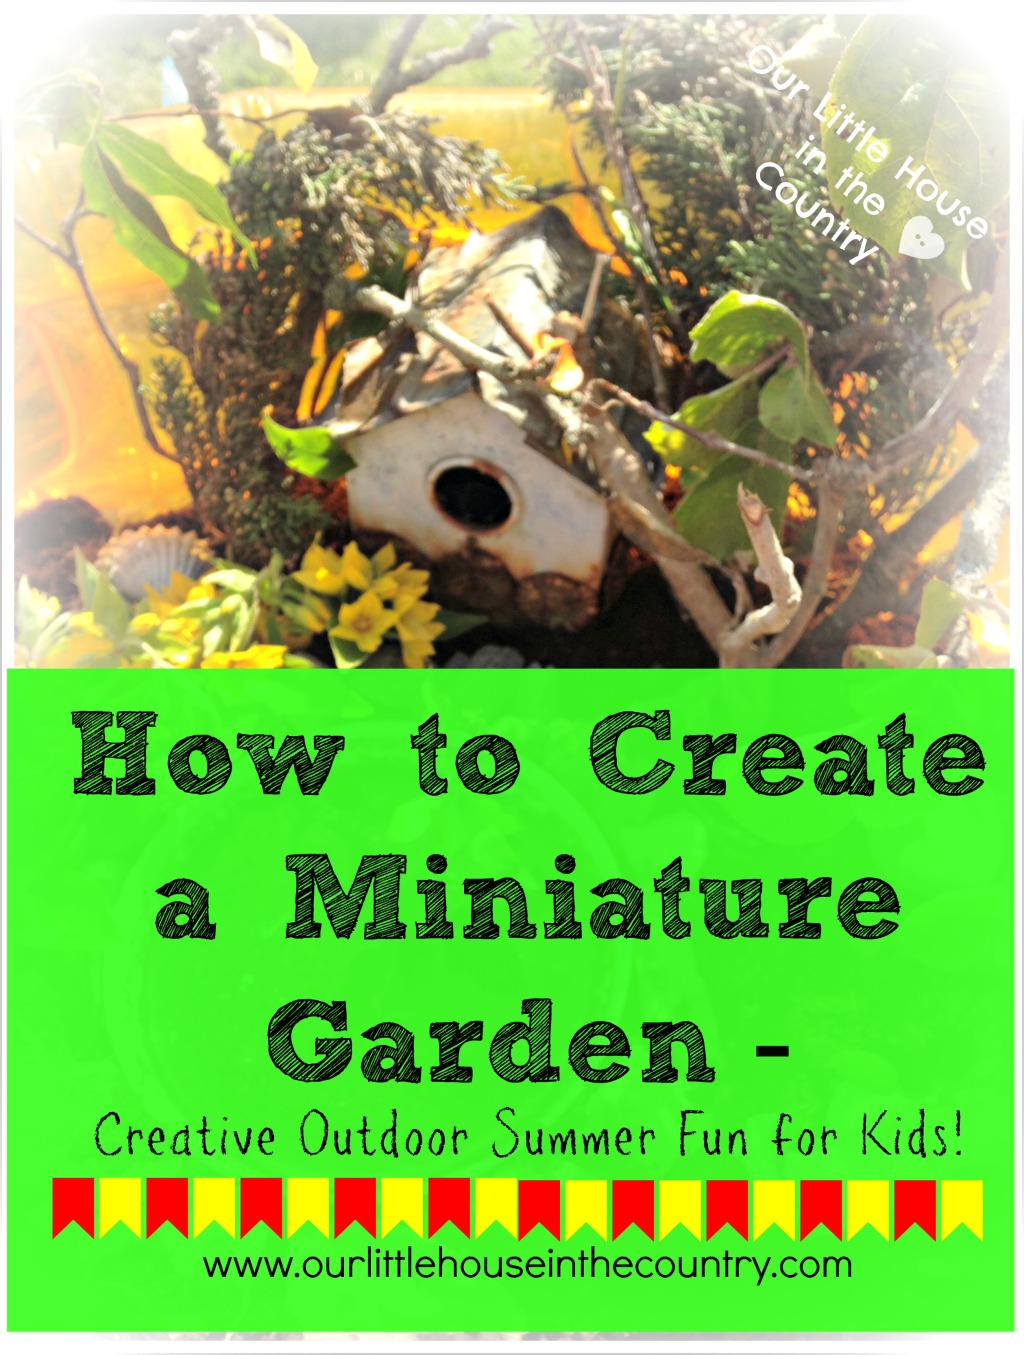 How To Create A Minaiture Garden - Outdoor Creative Summer Fun For Kids - Our Little House in the Country #summer #outdoorfun #kidsactivities